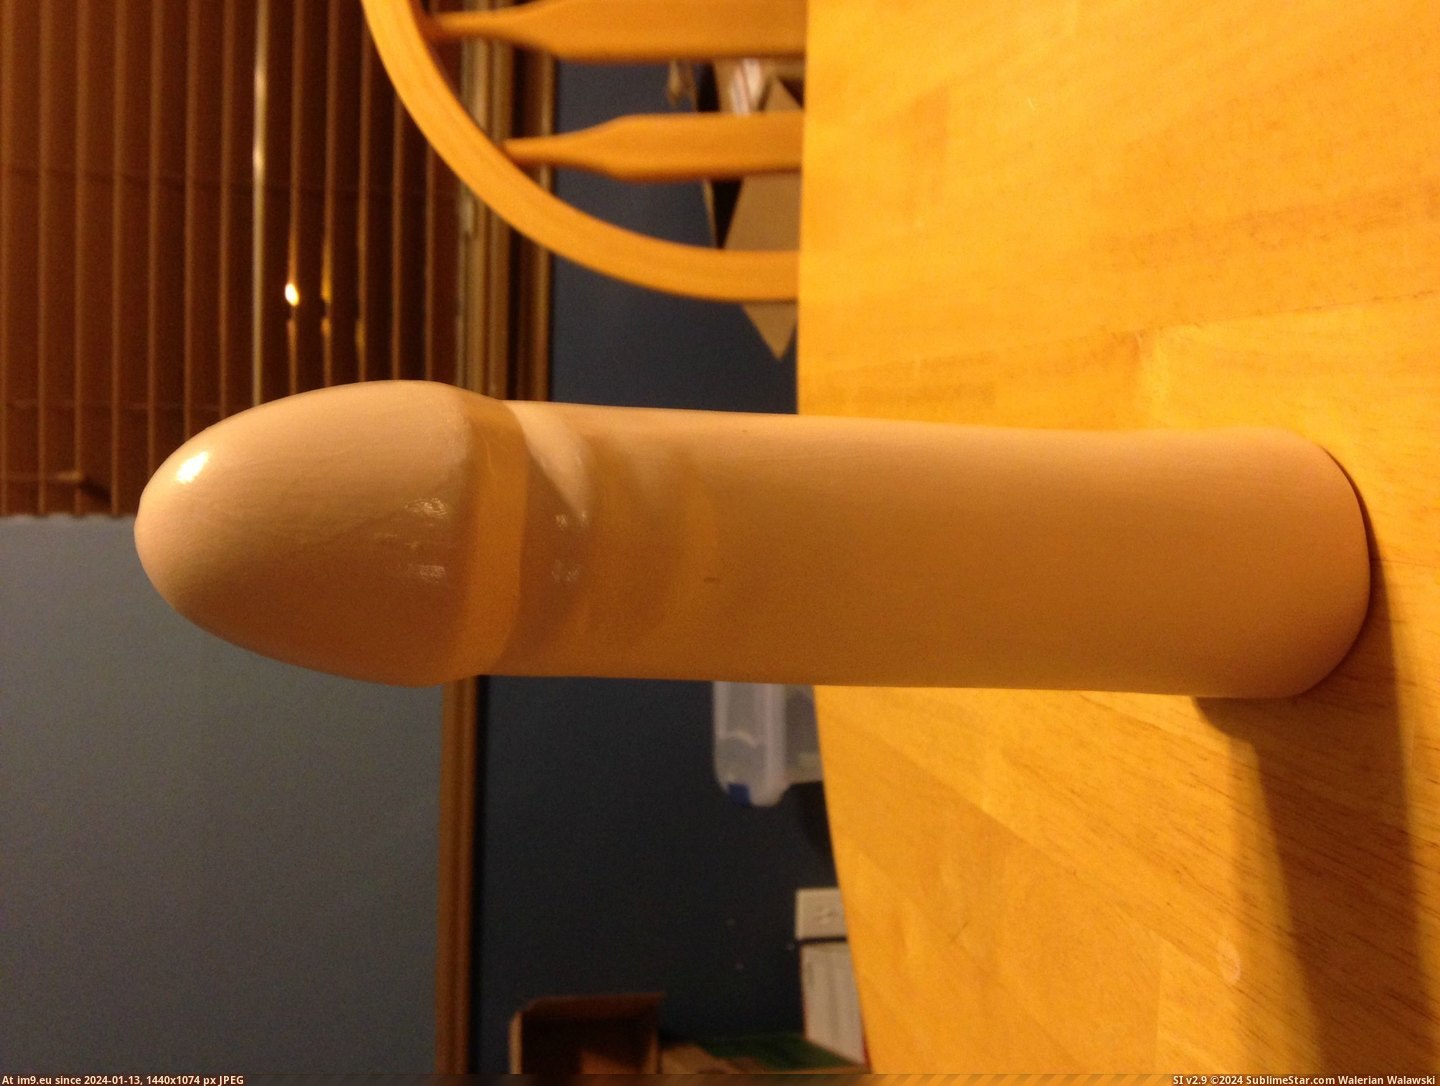 #Wtf #Art #Great #Out #Penis #Gave #Grandmother #Gifts #Got #She #Family #Boyfriend [Wtf] My Great-Grandmother got a boyfriend...so she made this penis art and gave it out as gifts to the family. [NSFW] 3 Pic. (Bild von album My r/WTF favs))